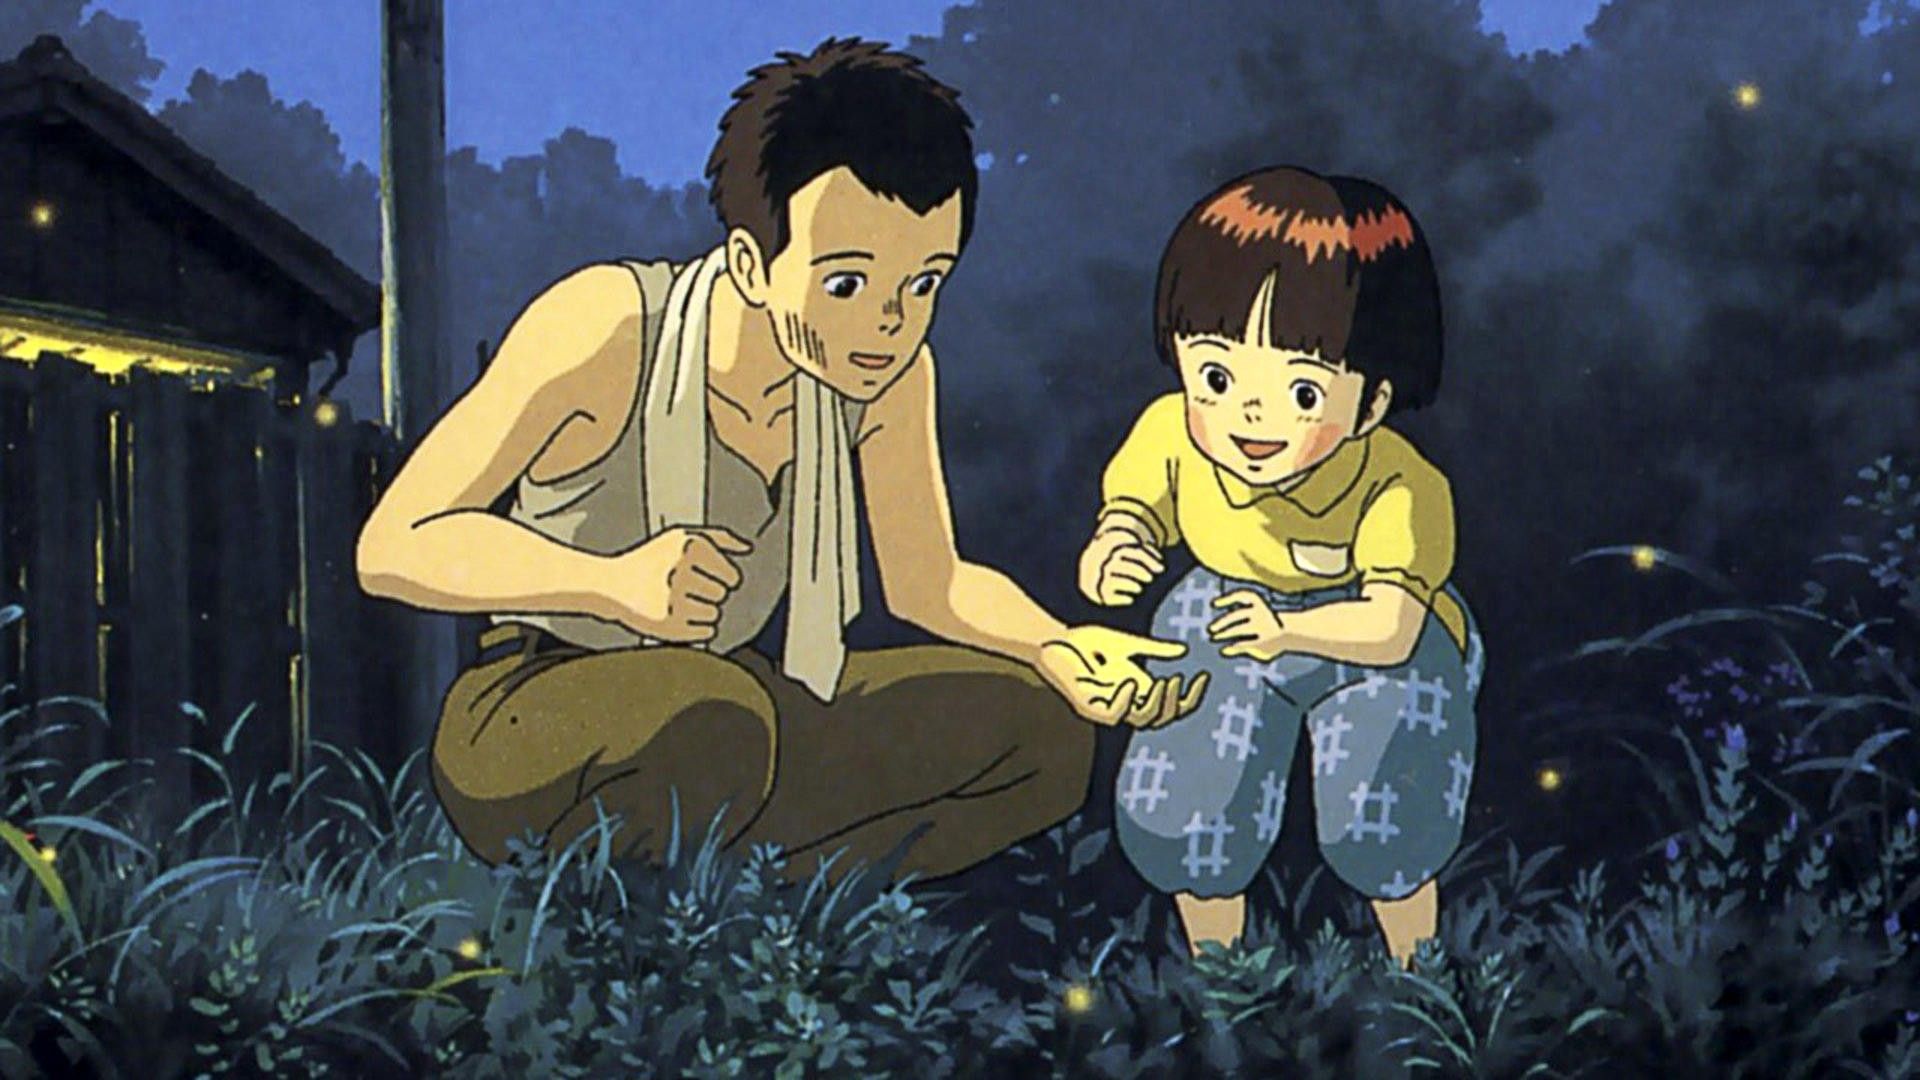 Art House: wartime animation Grave of the Fireflies is a depressing masterpiece. South China Morning Post